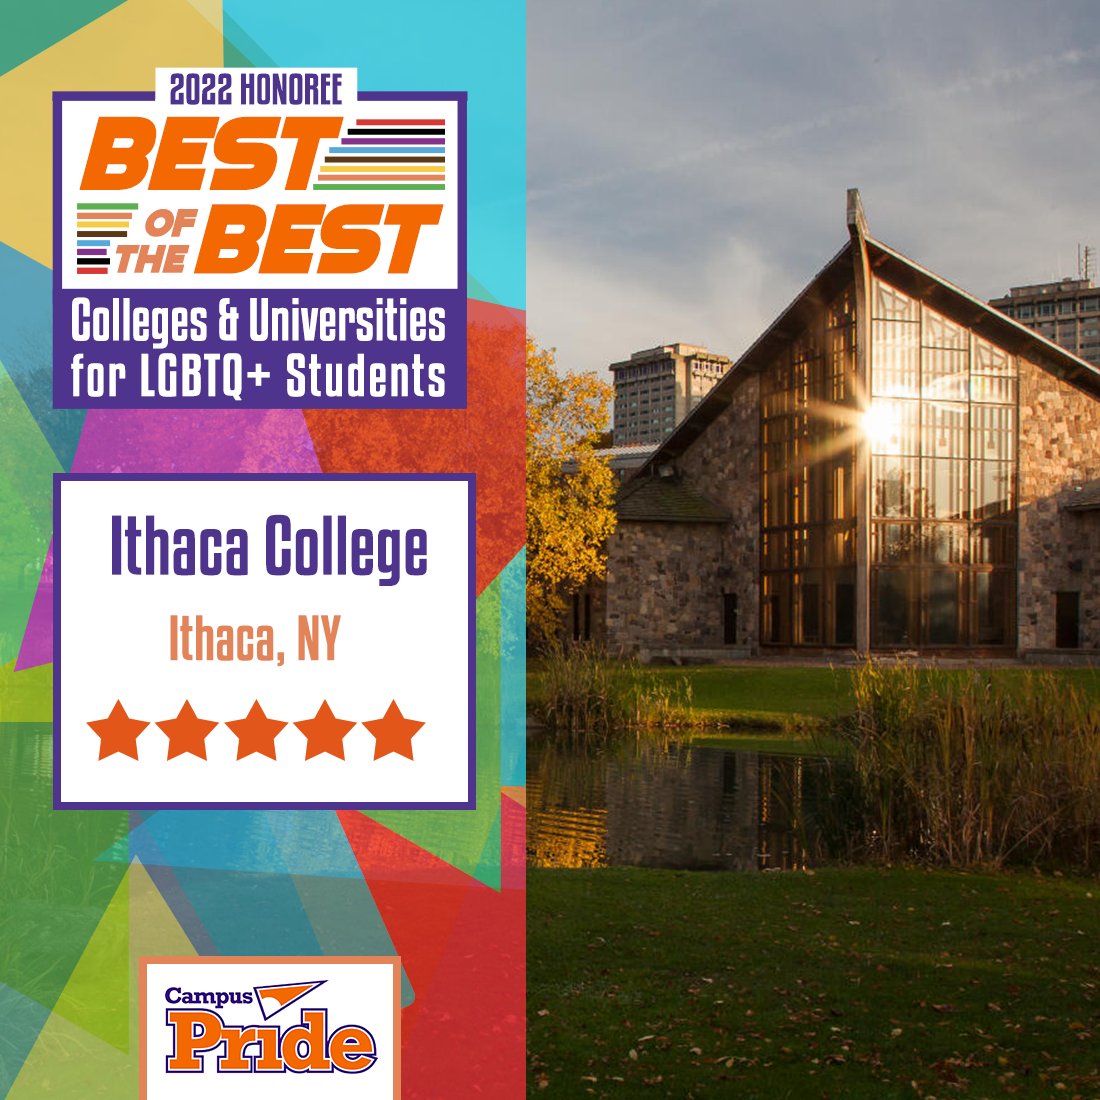 IC is proud and honored to be included on @CampusPride’s list of Best of the Best Colleges and Universities for LGBTQ+ Students—setting a positive example for inclusion, equity, and belonging on campus! See IC News: ithaca.edu/news/place-inc…
@iclgbt #IthacaCollege #LGBTQStudents